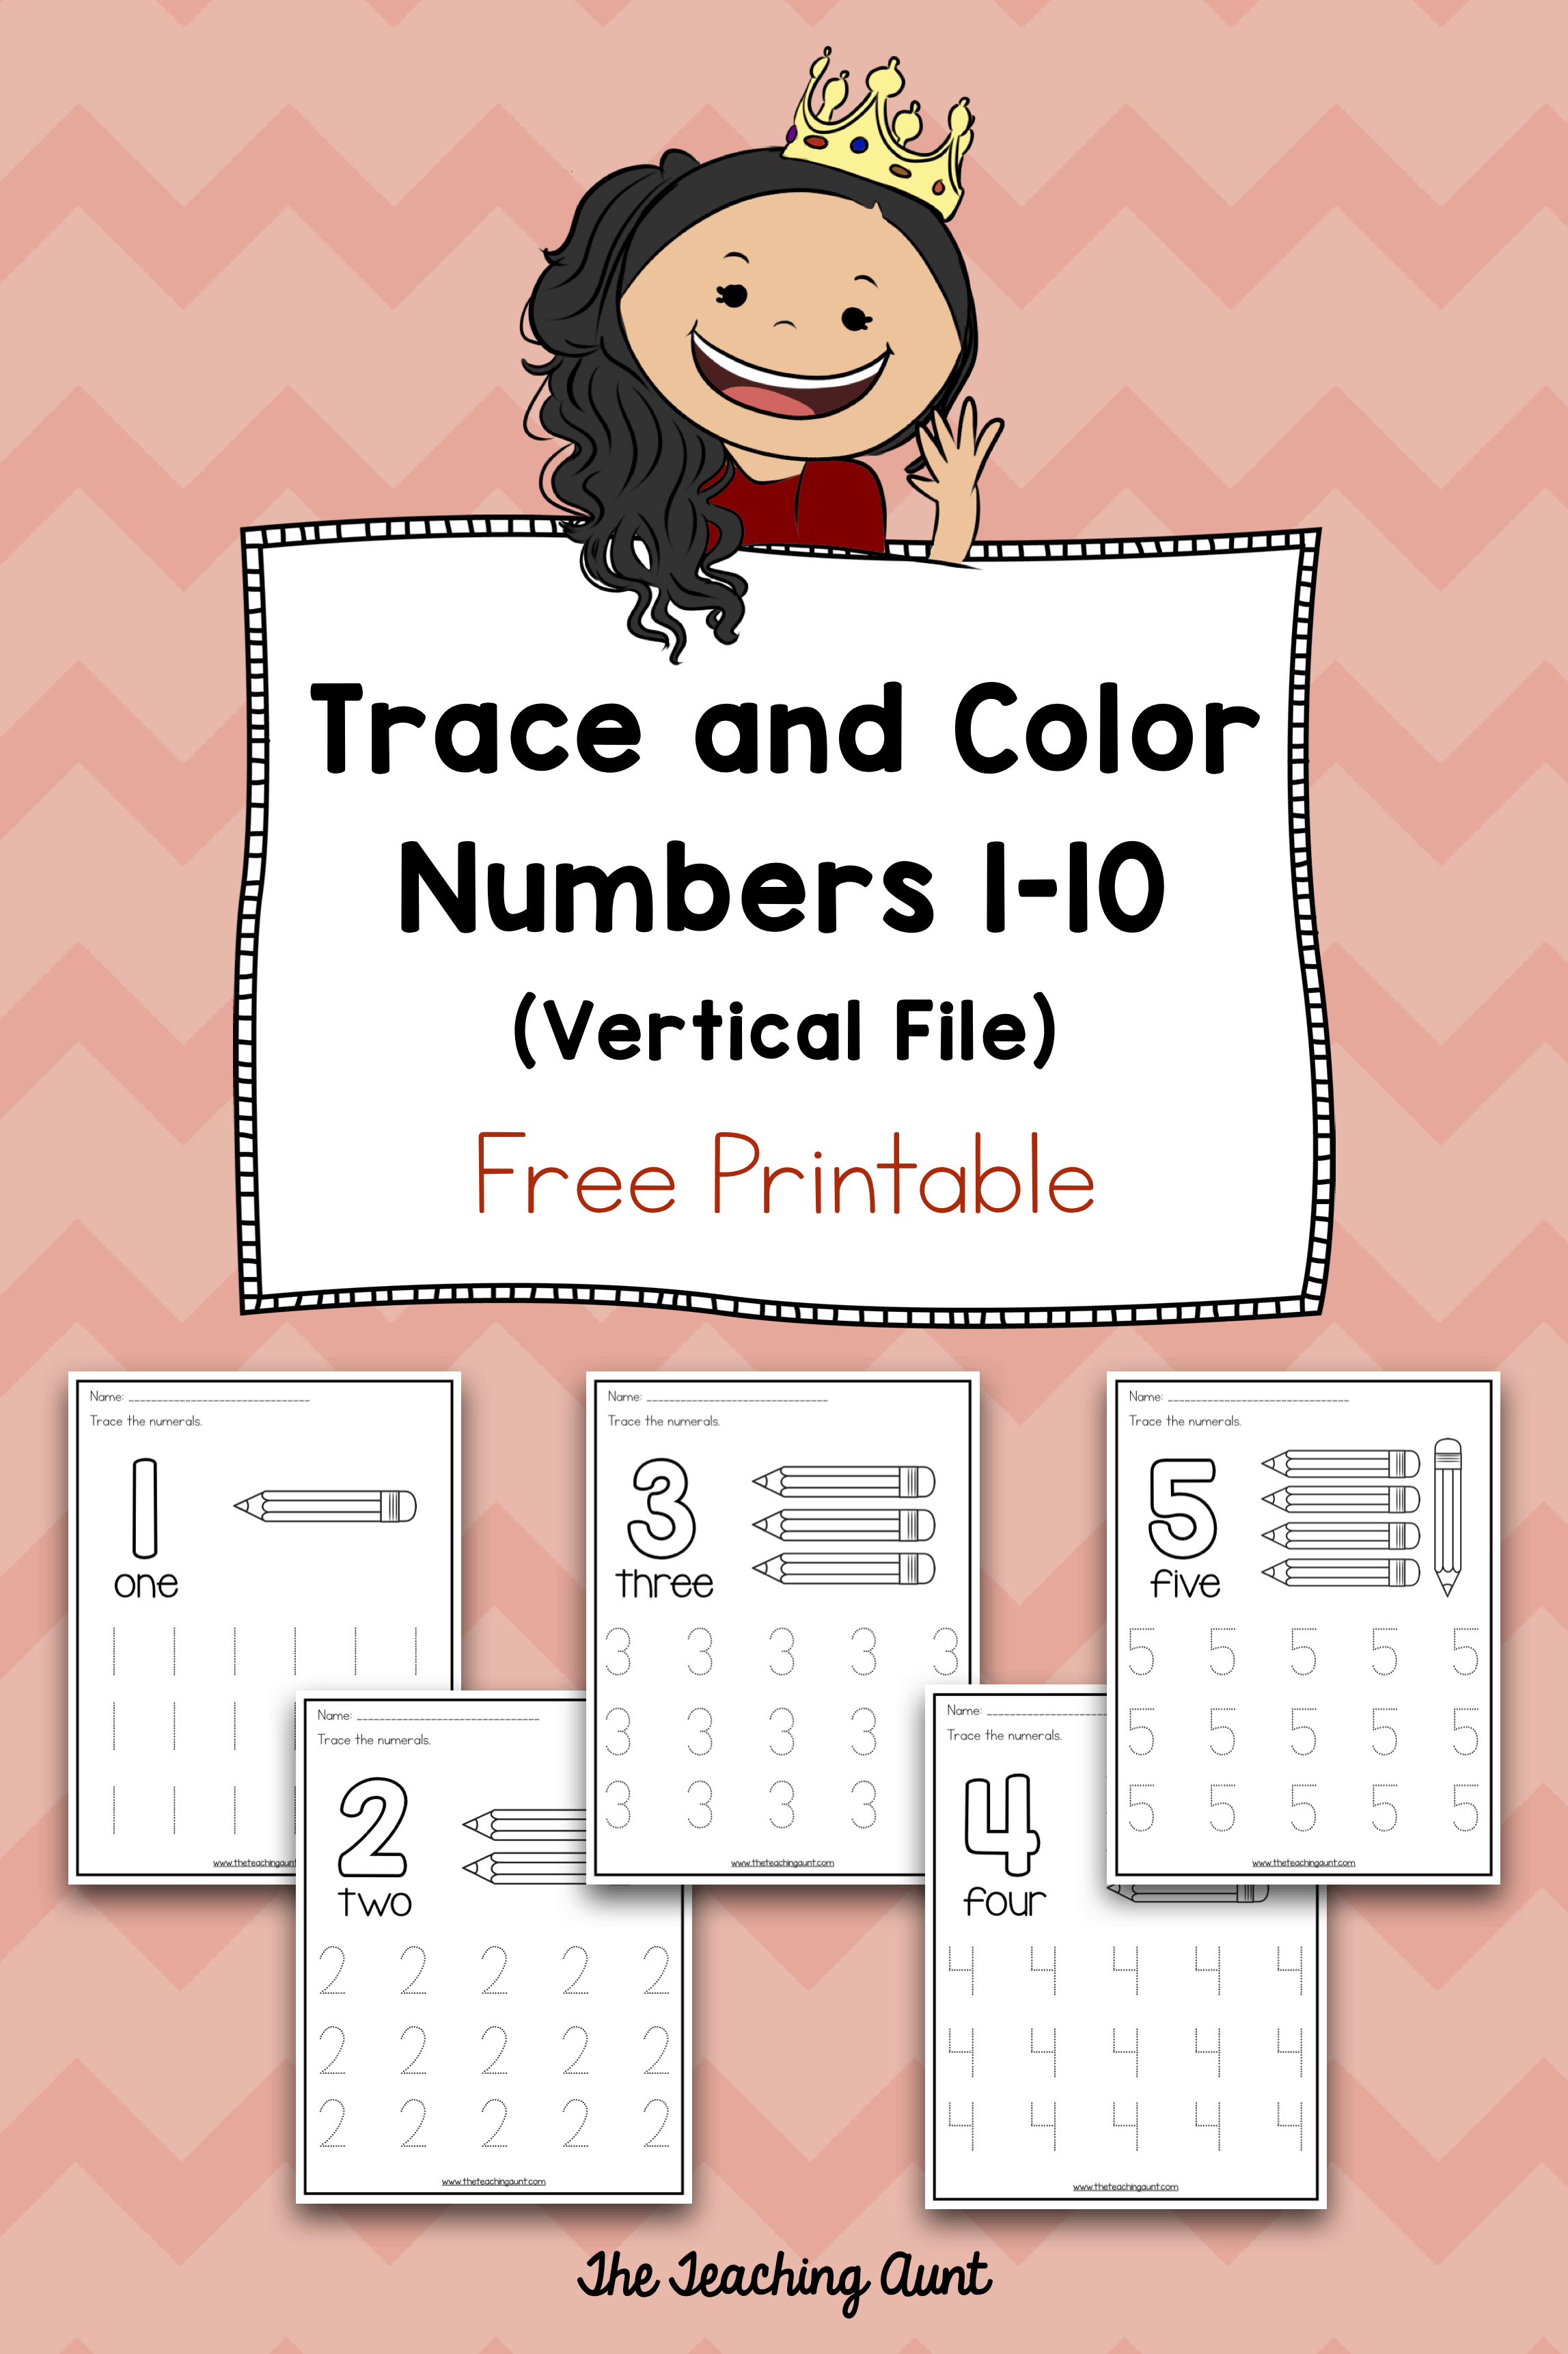 Trace and Color Numbers 1-10